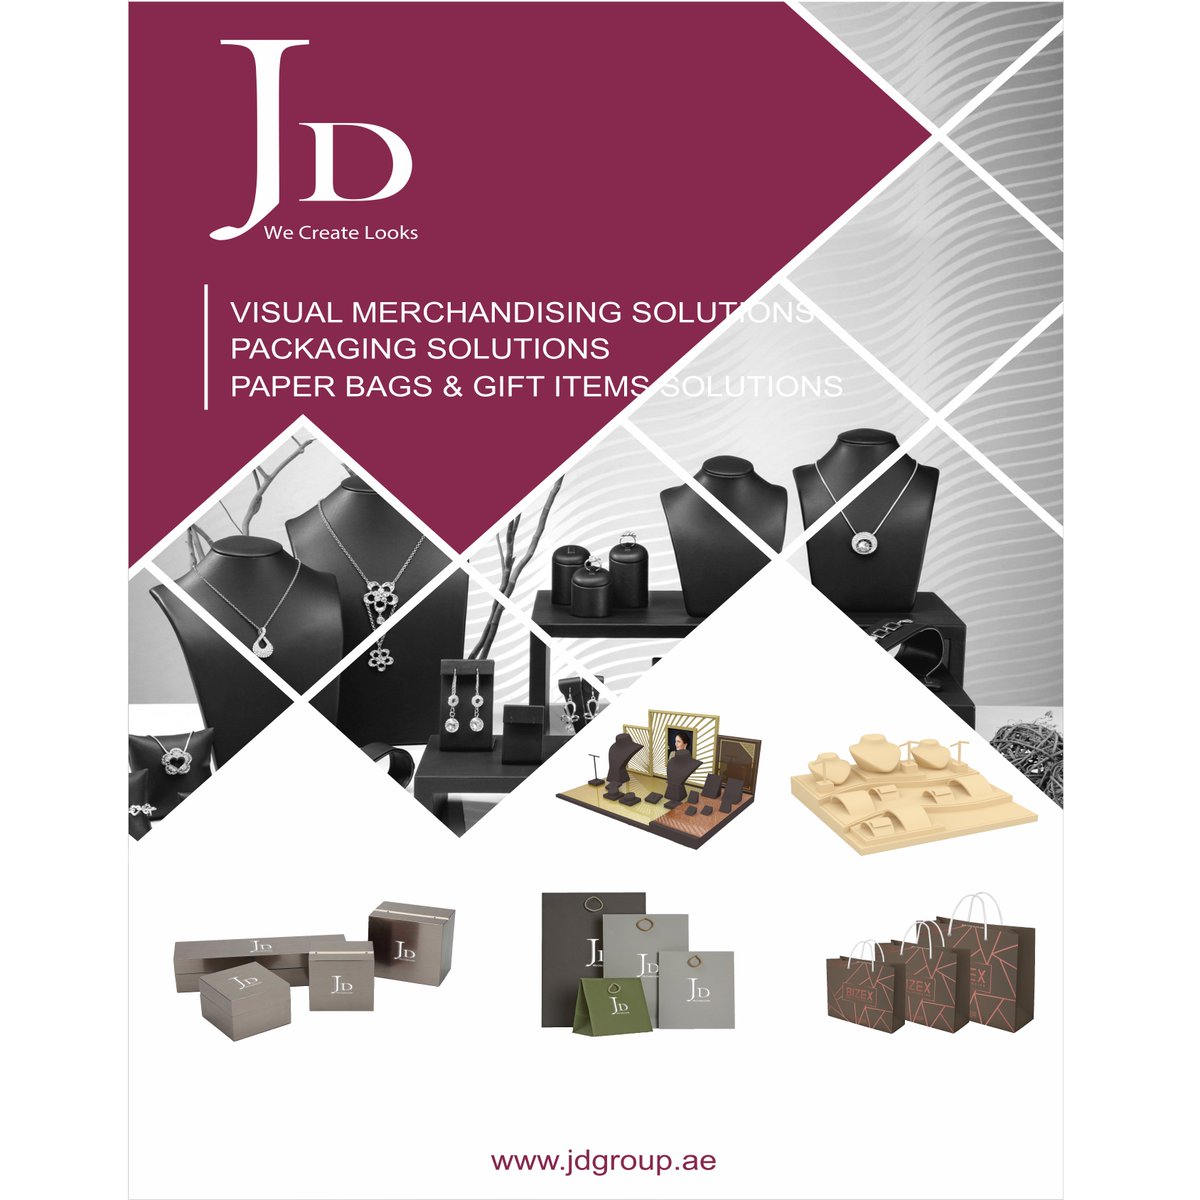 JD we create looks,
Your complete solutions provider for visual merchandising, packaging, paper bags and gift items..

#Jdgroup #solutionsprovider #visualmerchandisingsolution
#Packagingsolution #paperbags #giftitemssolutions